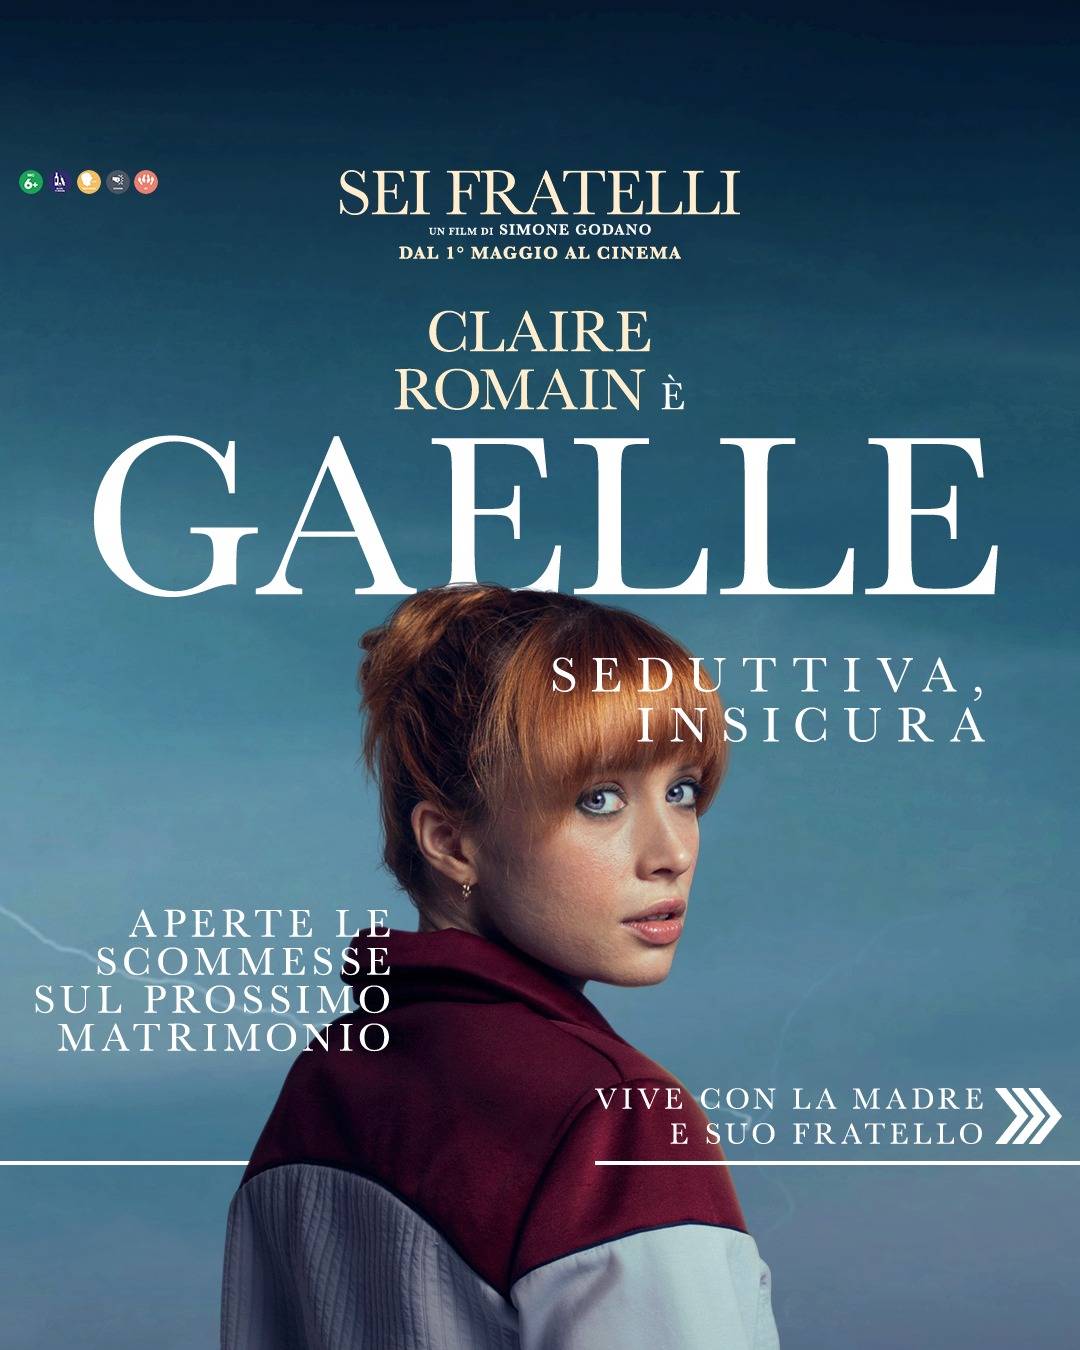 character poster sei fratelli